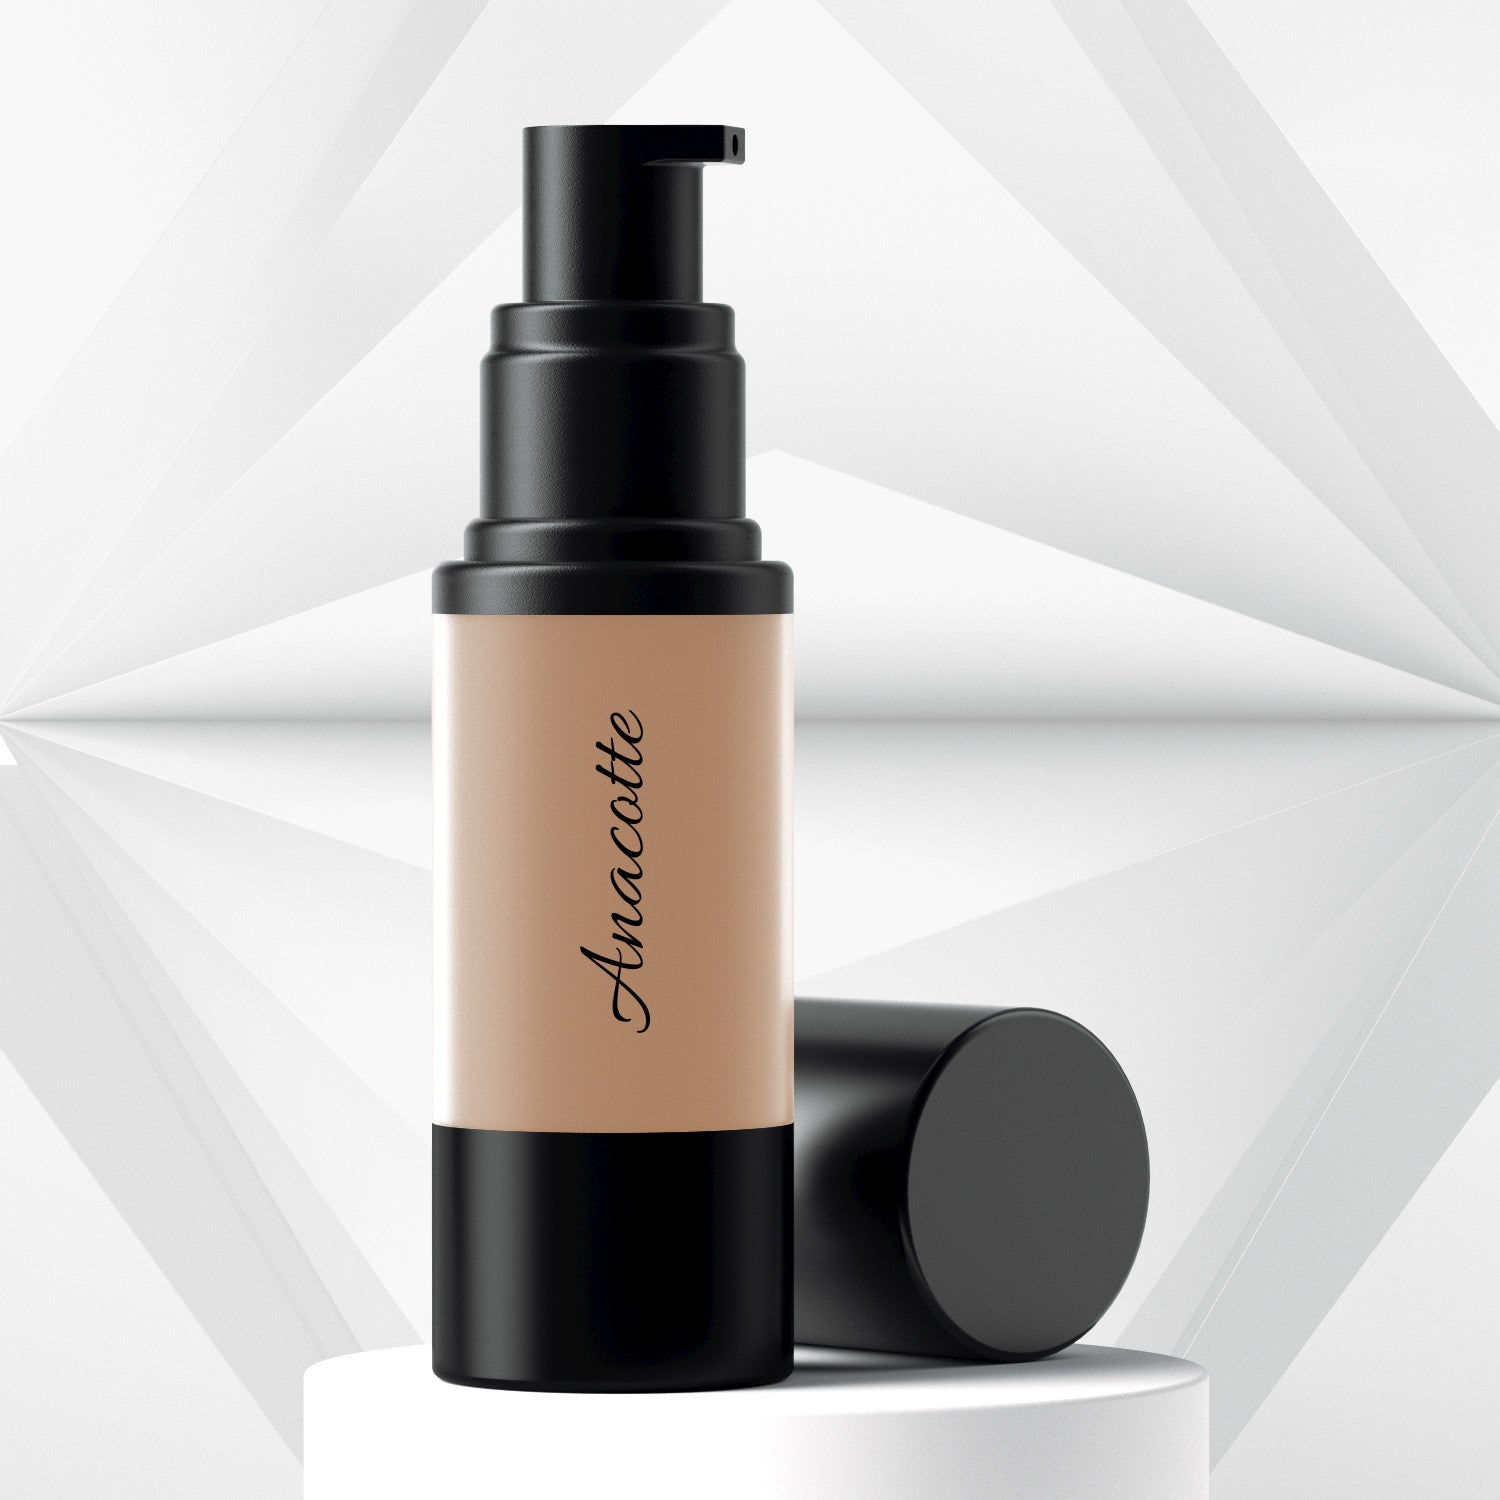 Anacotte Anti-aging Oil-Free Foundation Makeup bright